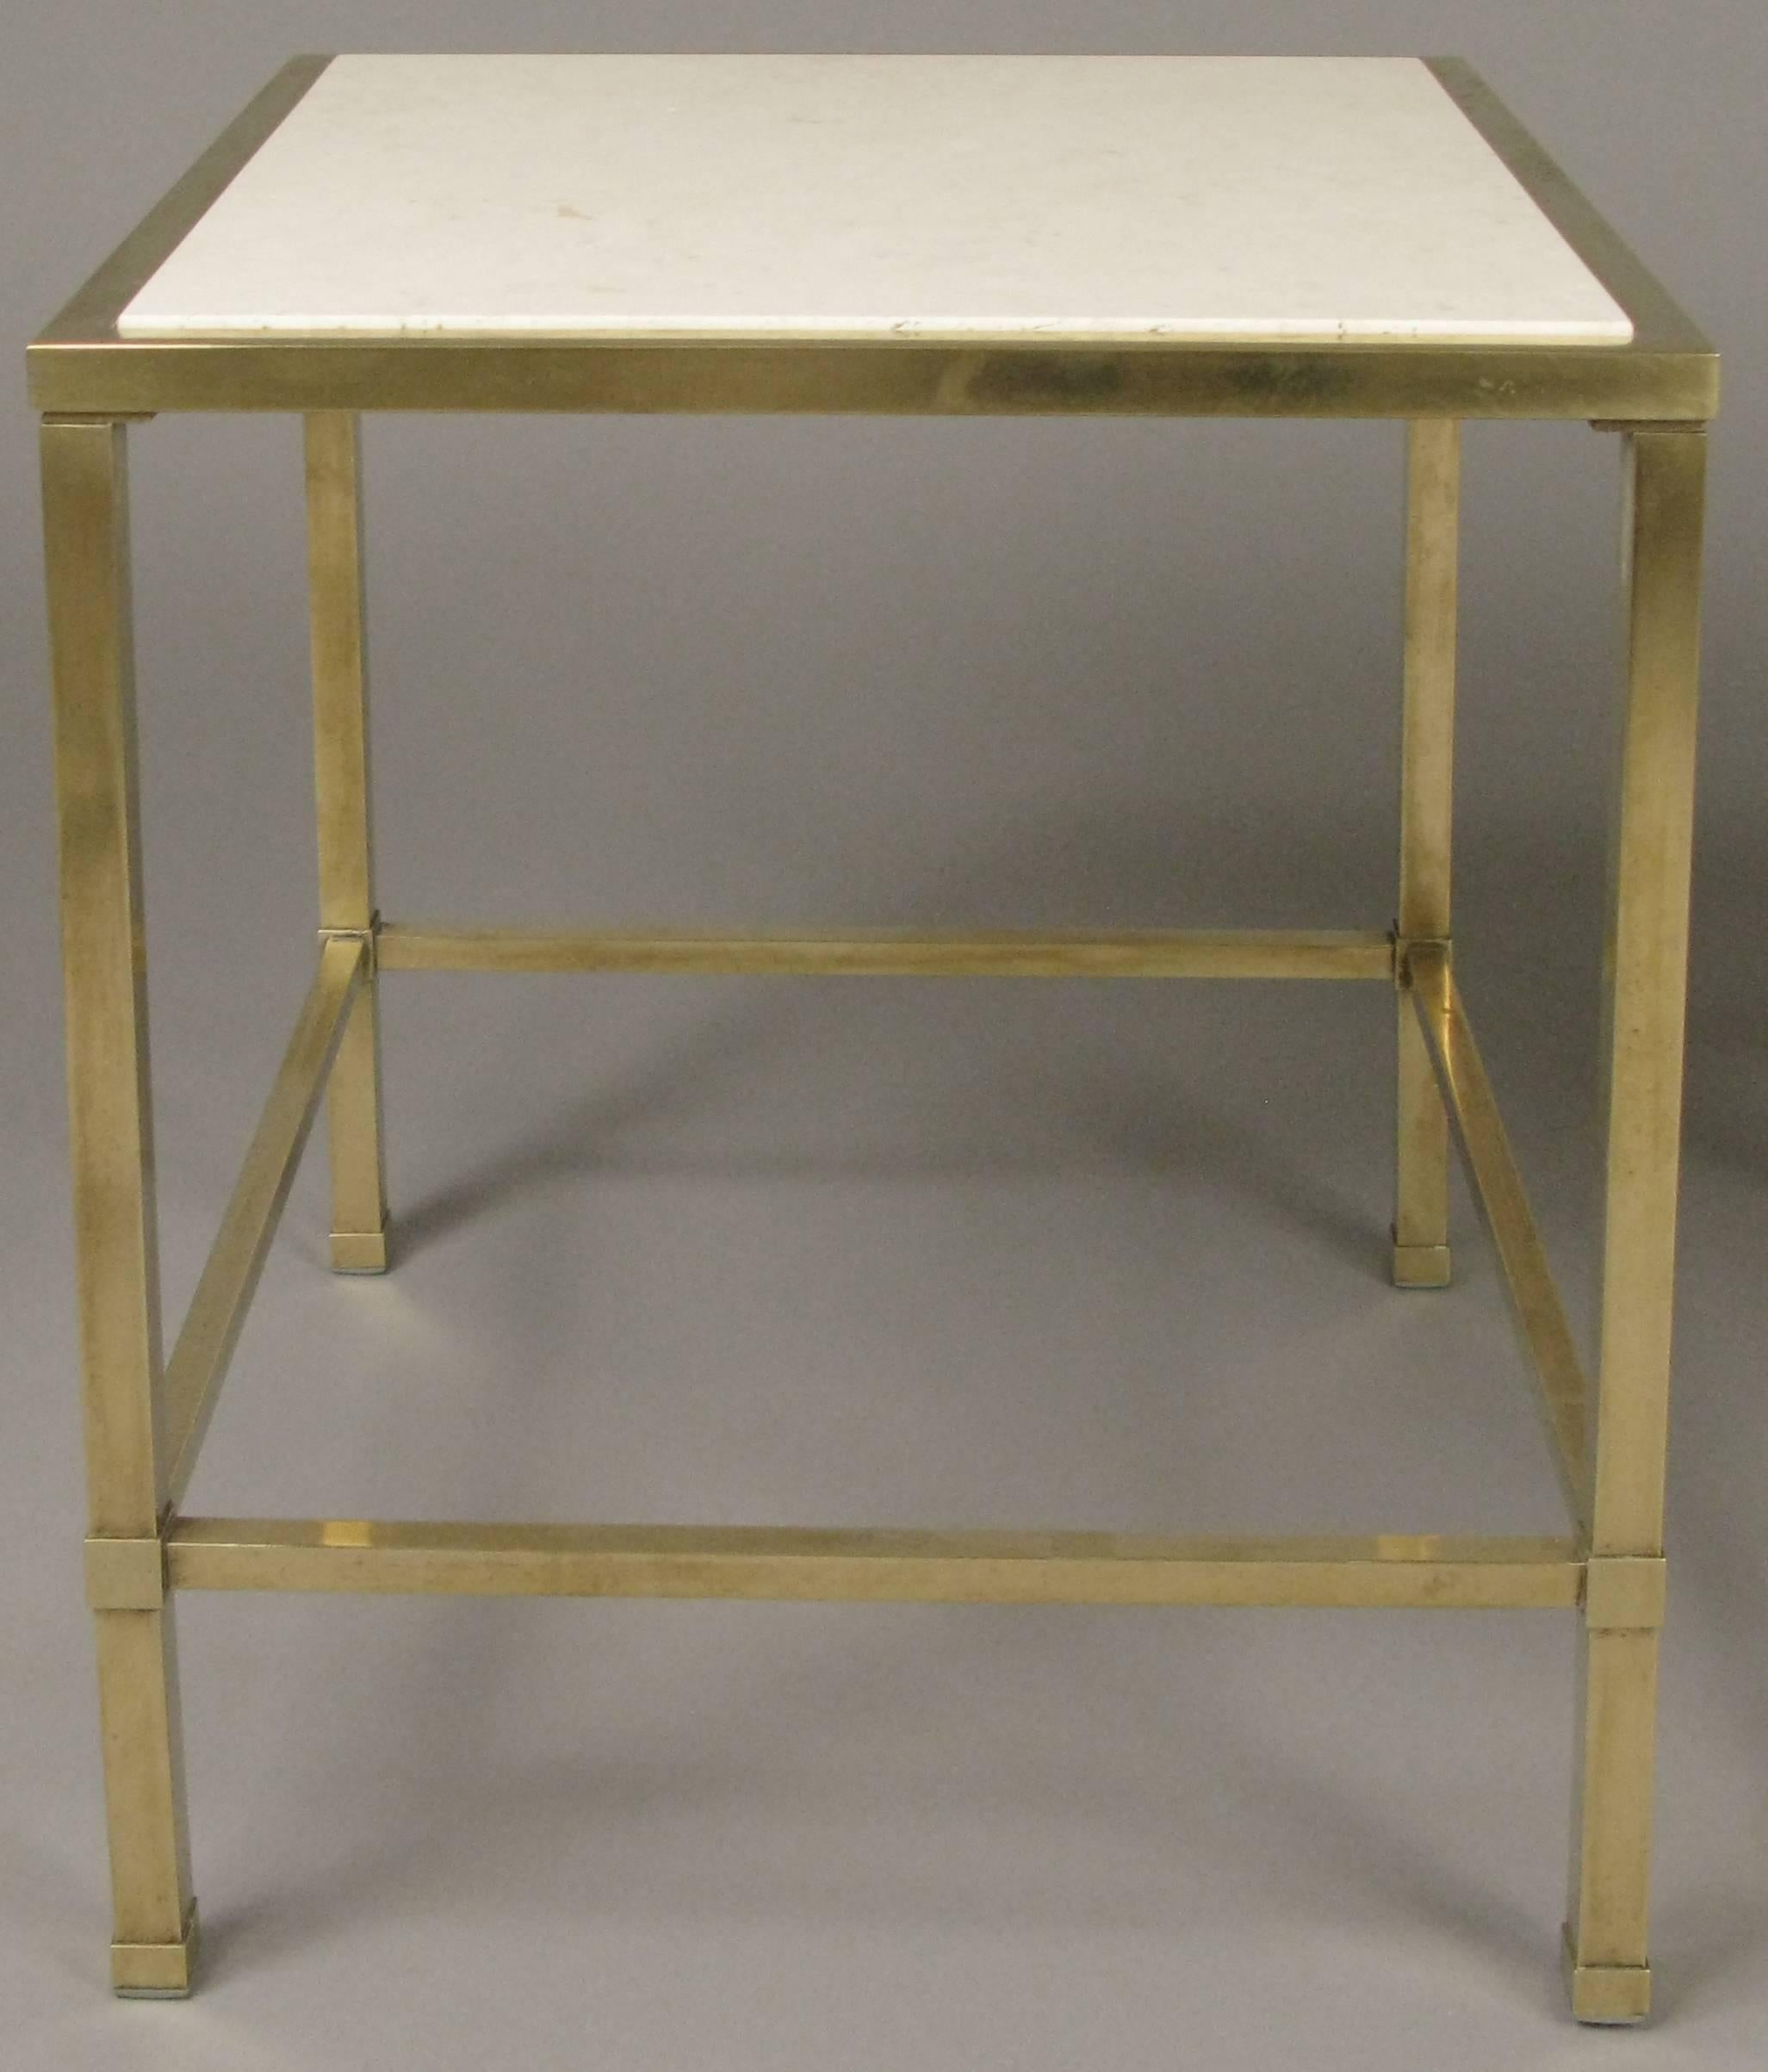 A very nice pair of vintage 1950s square brass side tables with brass stretchers and white travertine inserts. Excellent condition.